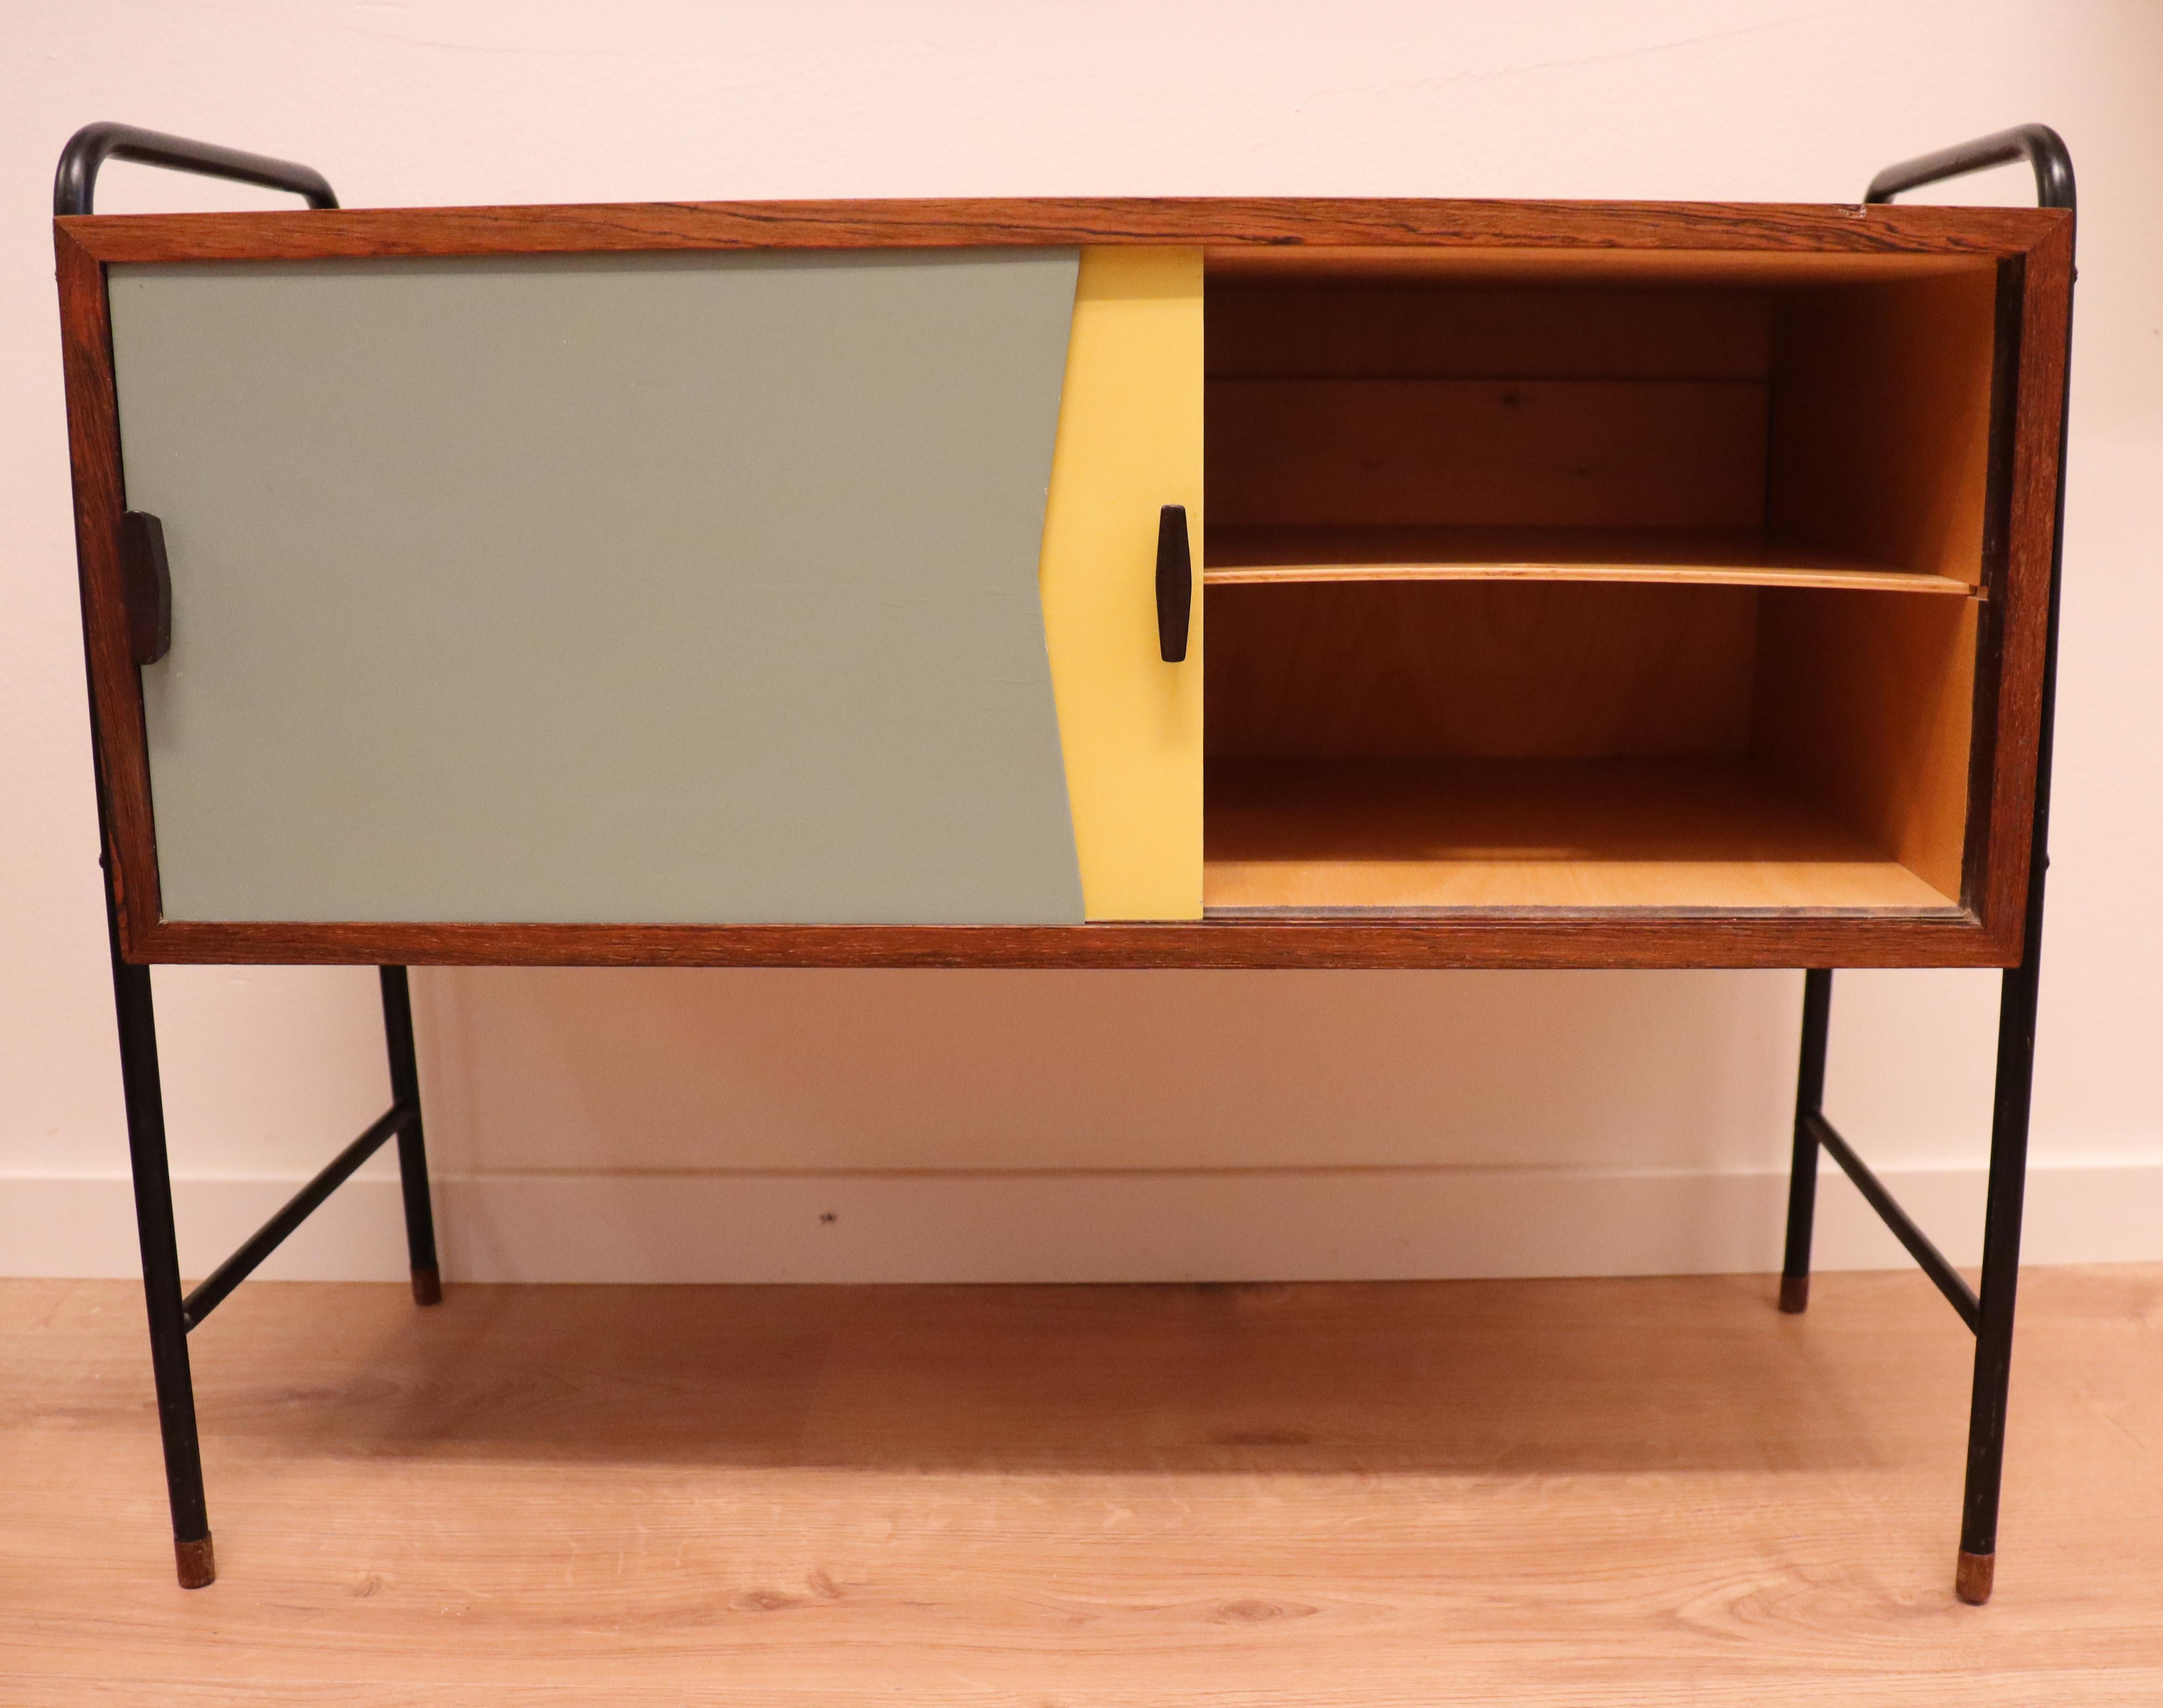 Mid-20th Century Small Sideboard, Yellow/Gray - Sliding Doors - Probably Denmark 1950s For Sale